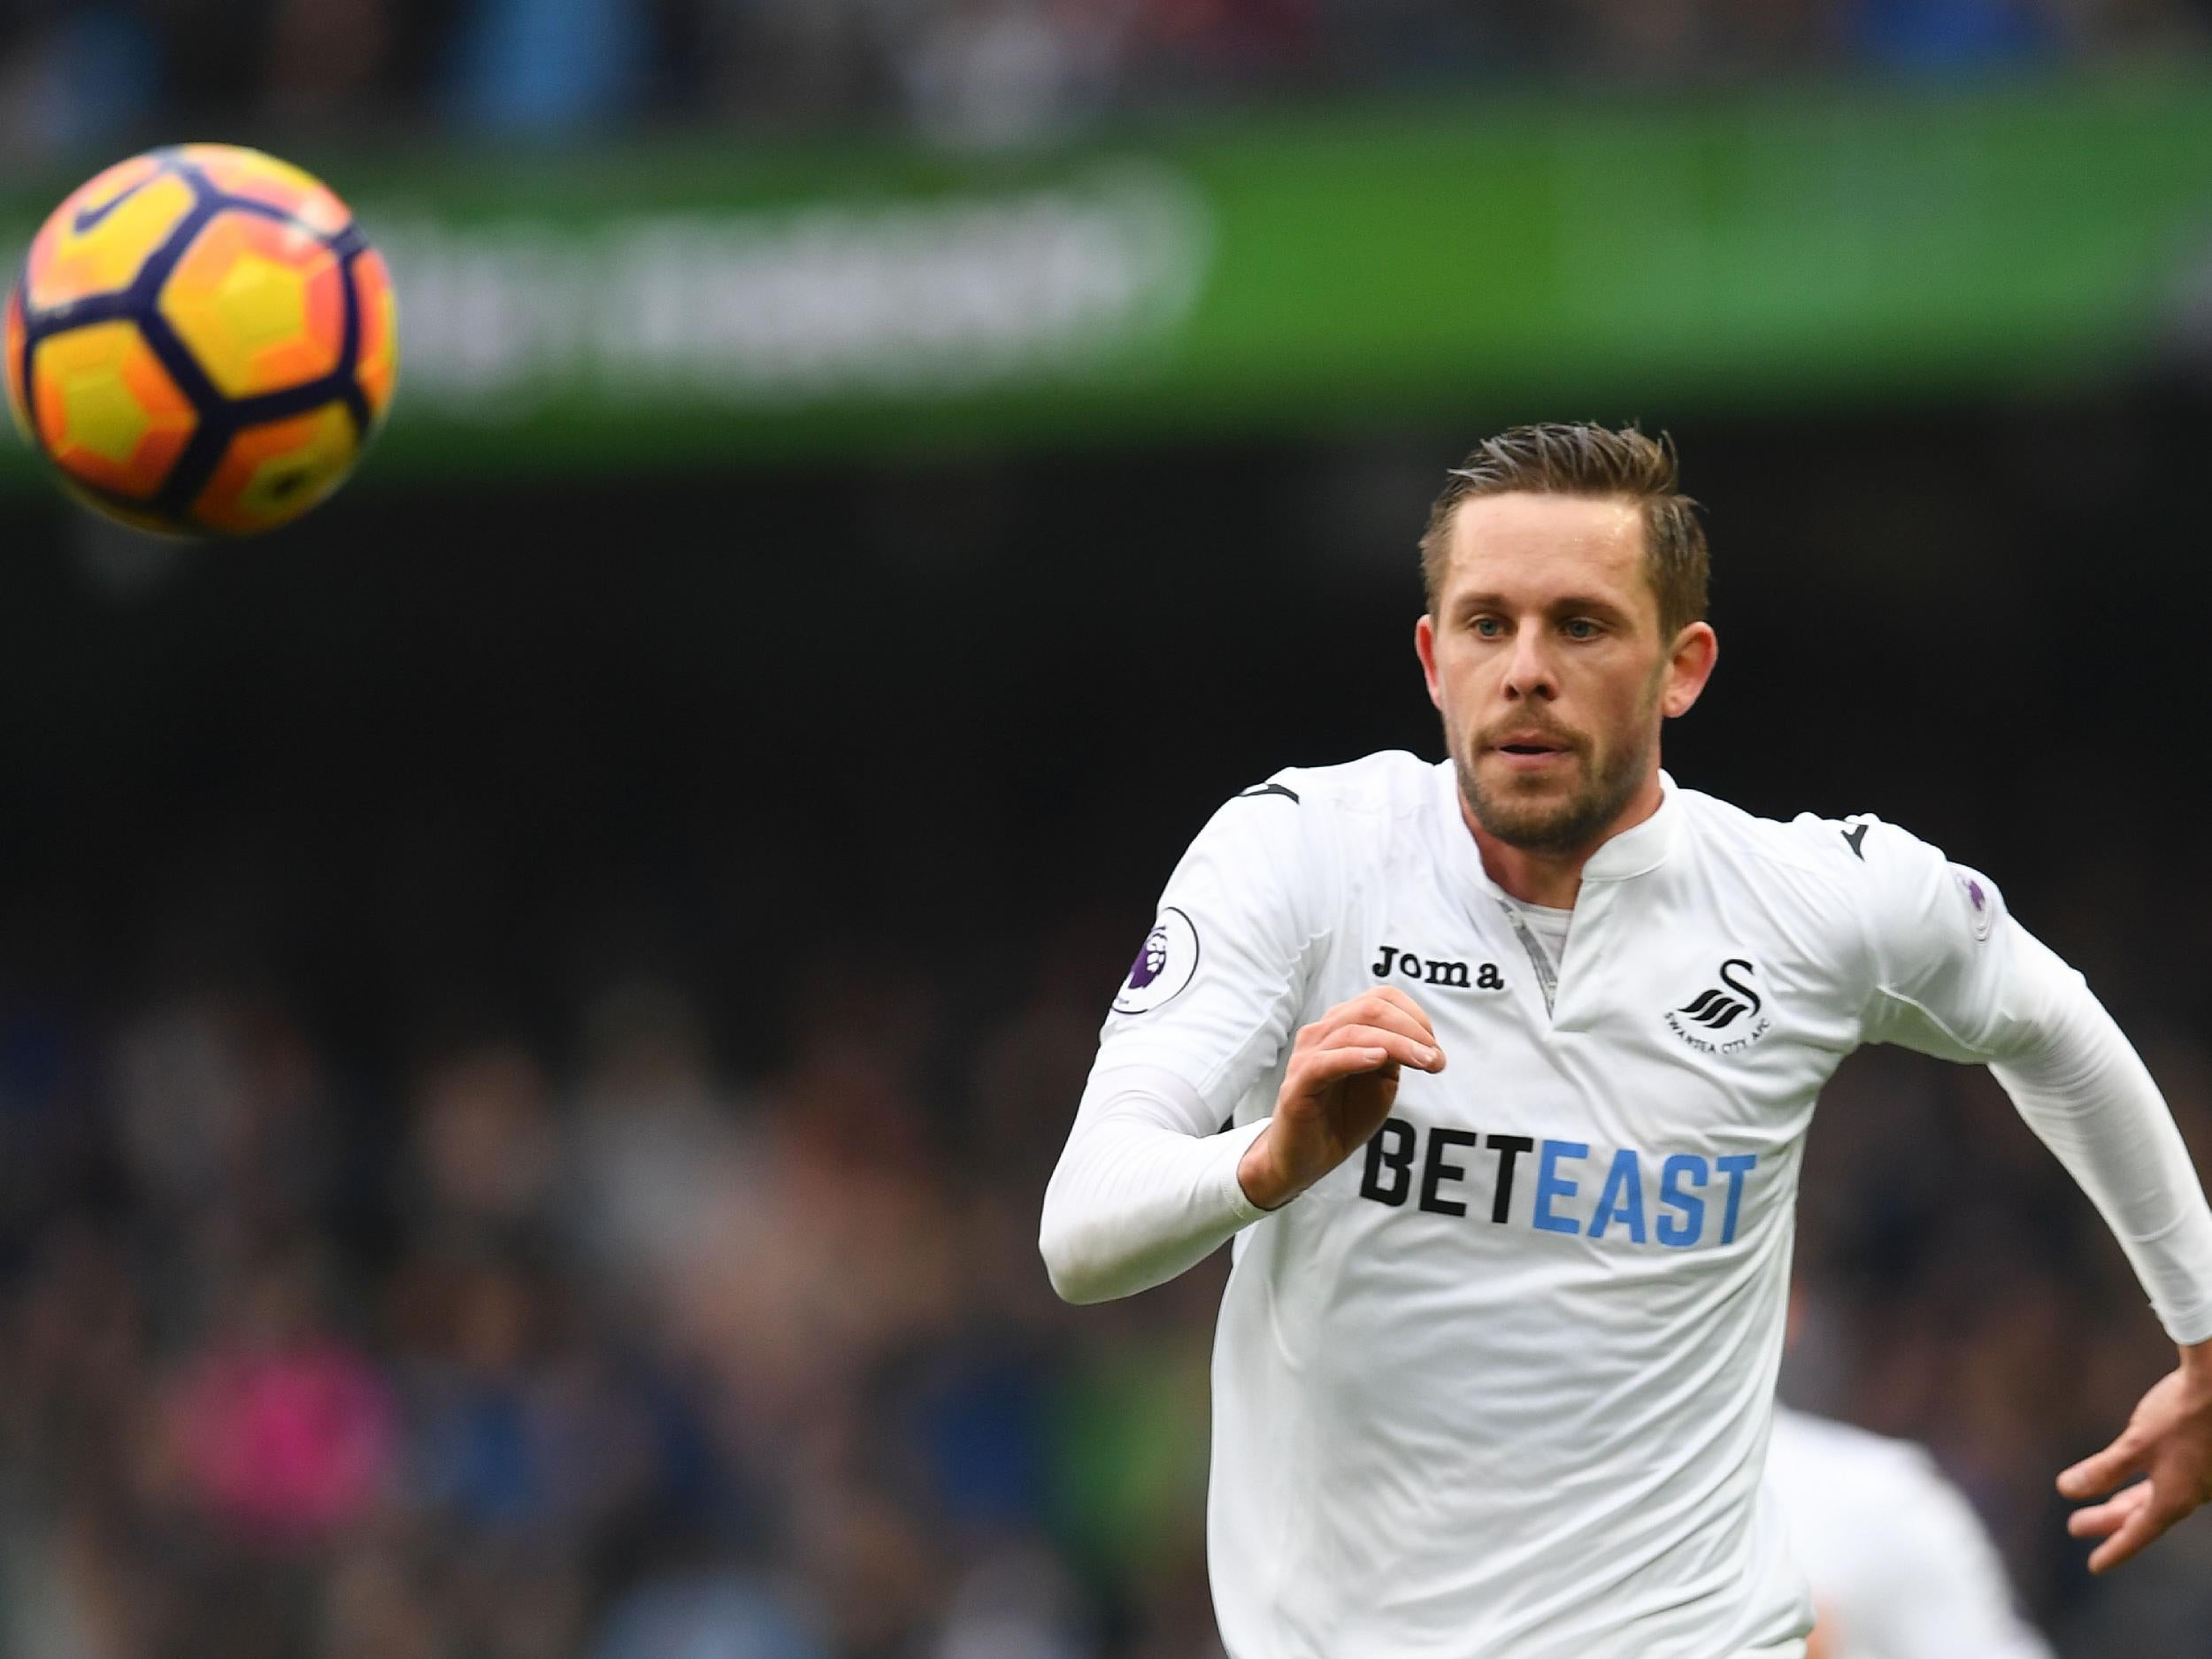 Only one player in the Premier League made more assists than Sigurdsson last season